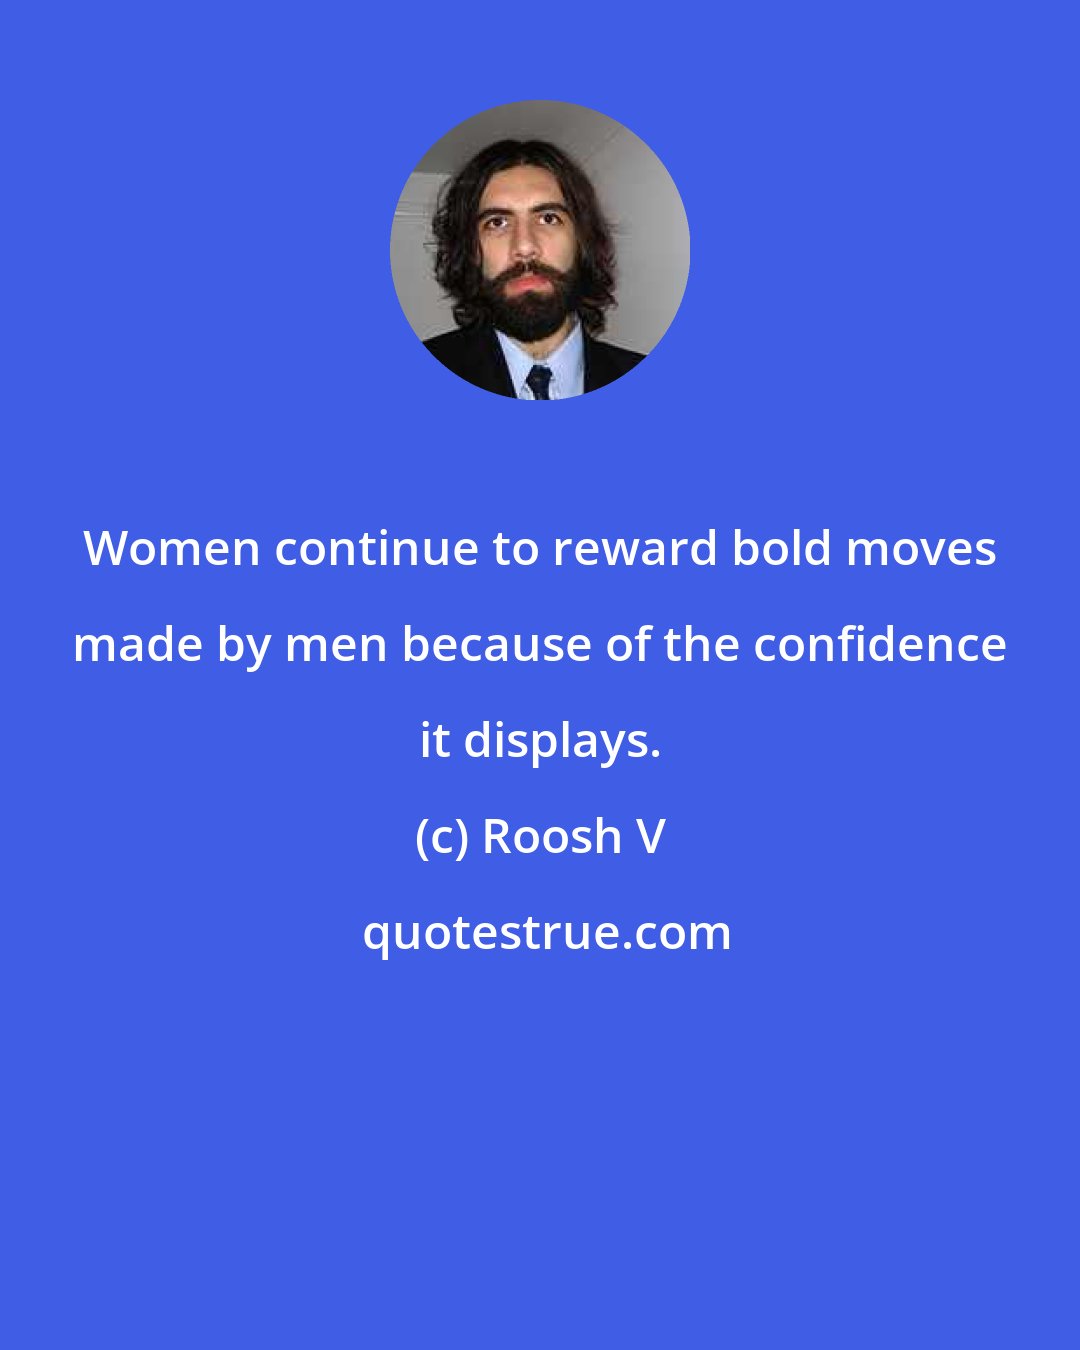 Roosh V: Women continue to reward bold moves made by men because of the confidence it displays.